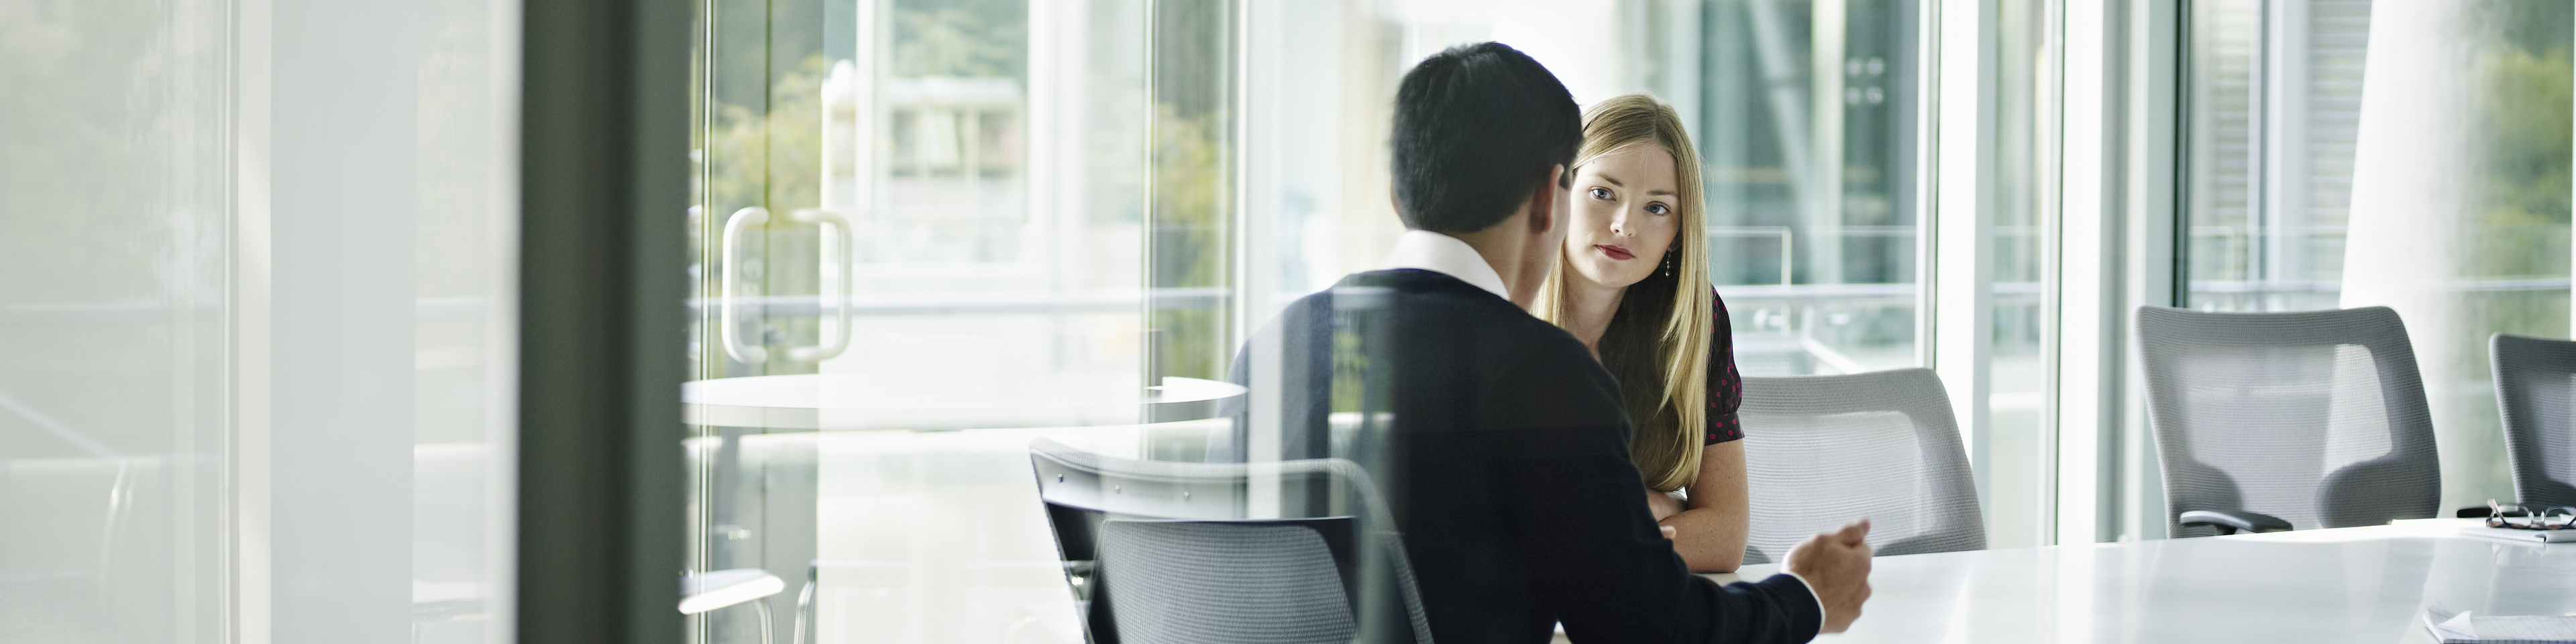 Businesswoman and businessman in discussion at table in glass walled conference room